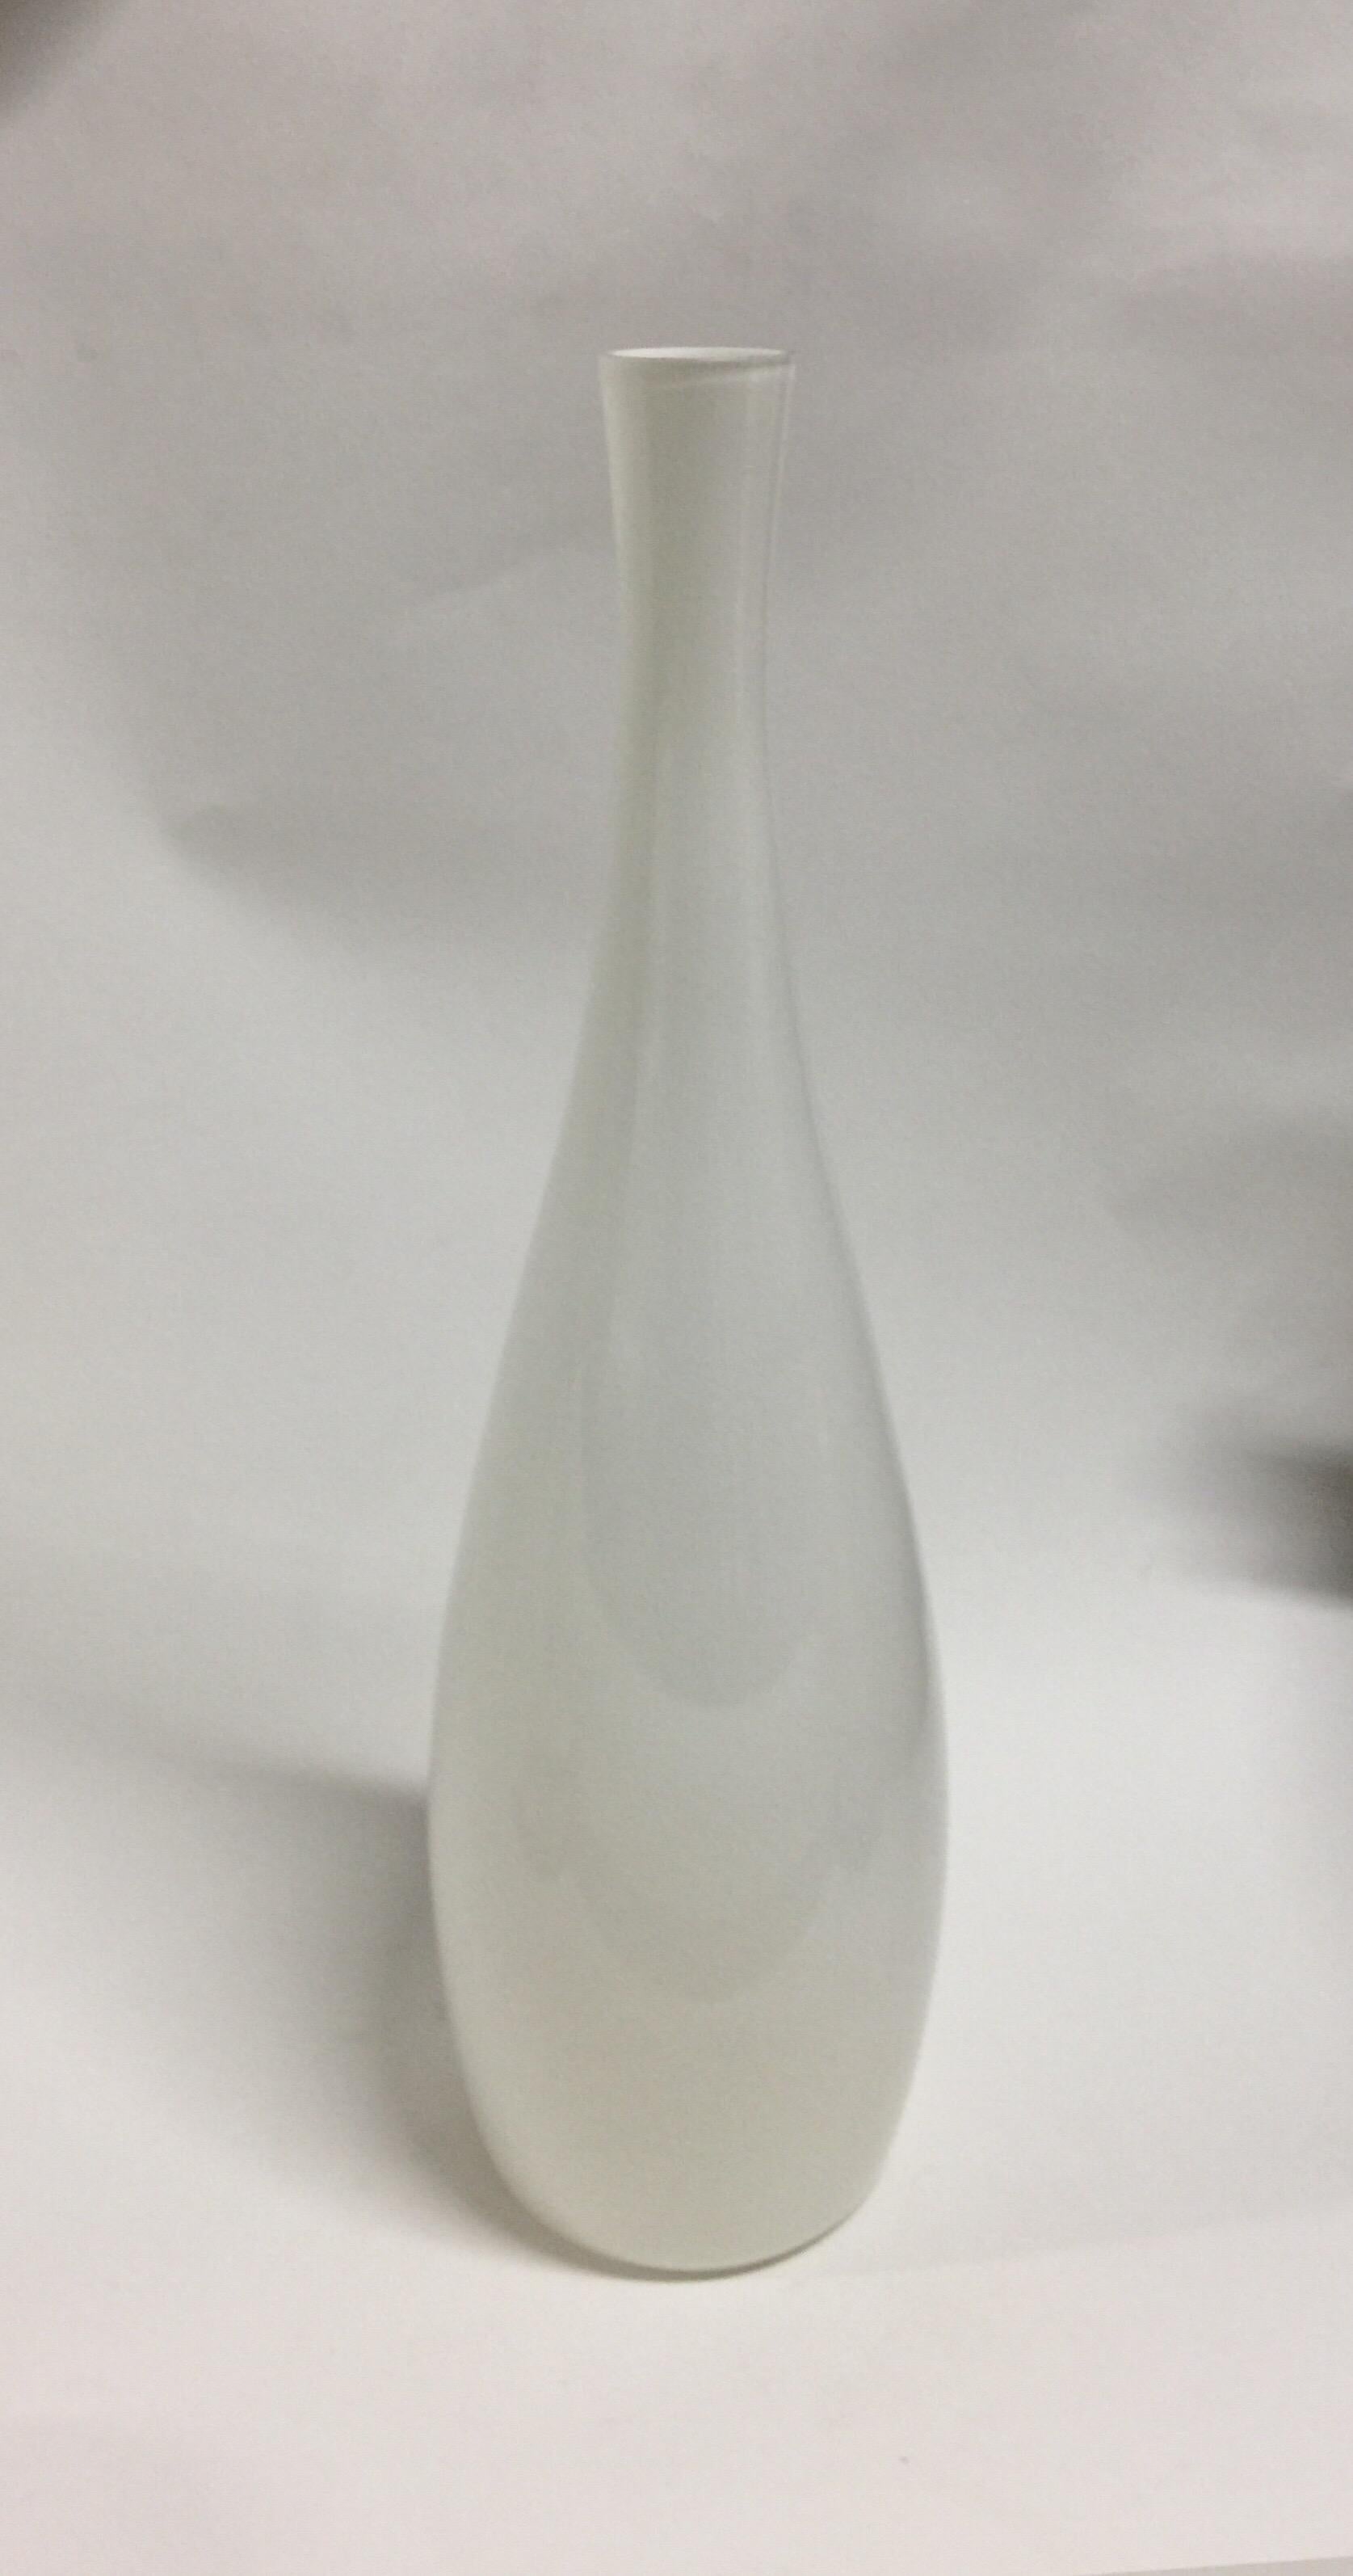 A vintage and tall art glass vase made by Jacob Bang for Kastrup. Denmark, circa 1950.

Please note that top of vase has a tiny chip; otherwise in good condition.

White. 

Made of cased glass with a beautiful iridescent quality. 

Retains partial